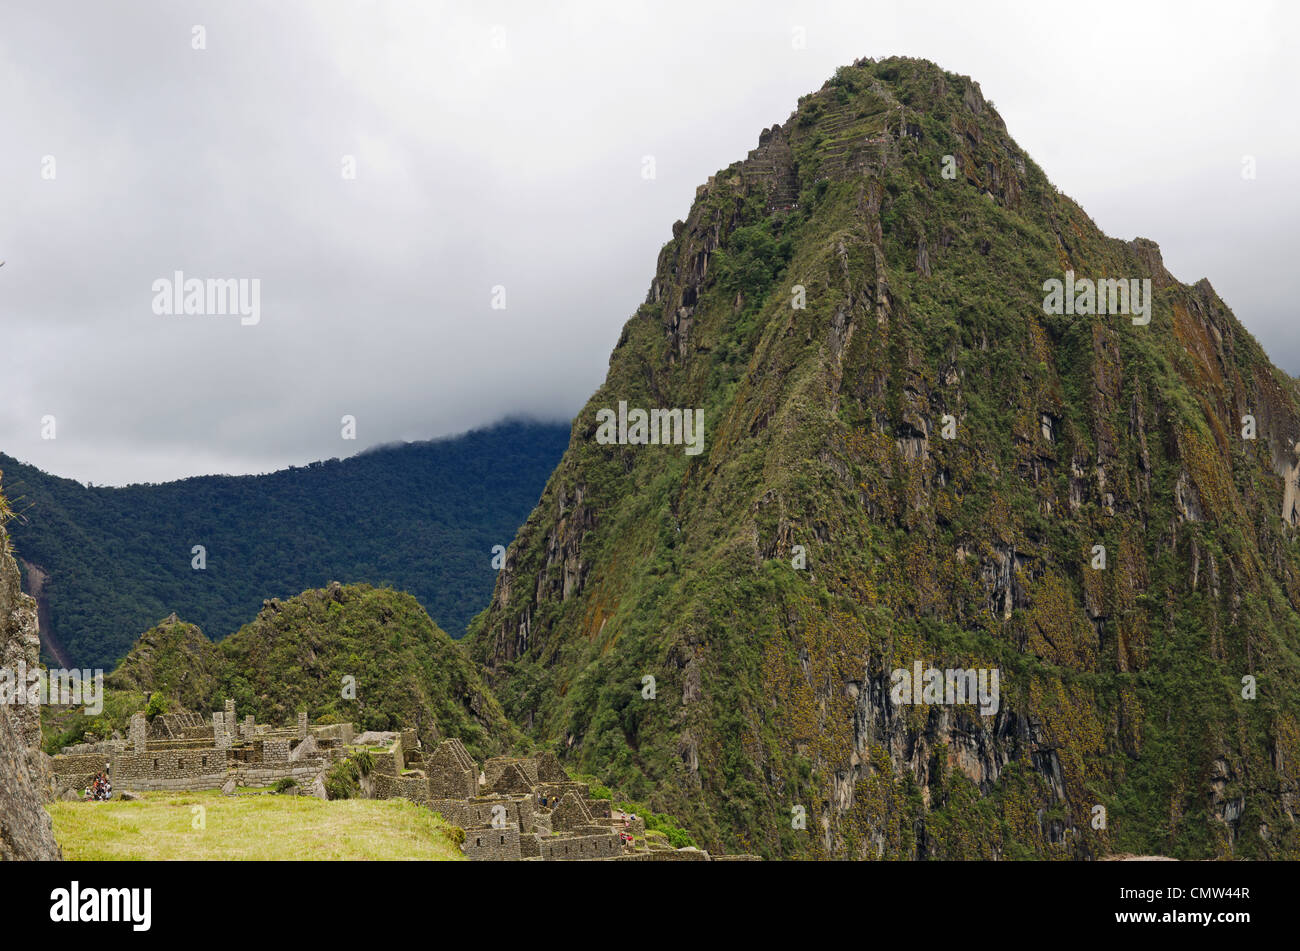 The mountain Huayna Picchu, or Wayna Picchu, which means Young Peak in Quechua, rises over the ruins of Machu Picchu, Peru Stock Photo